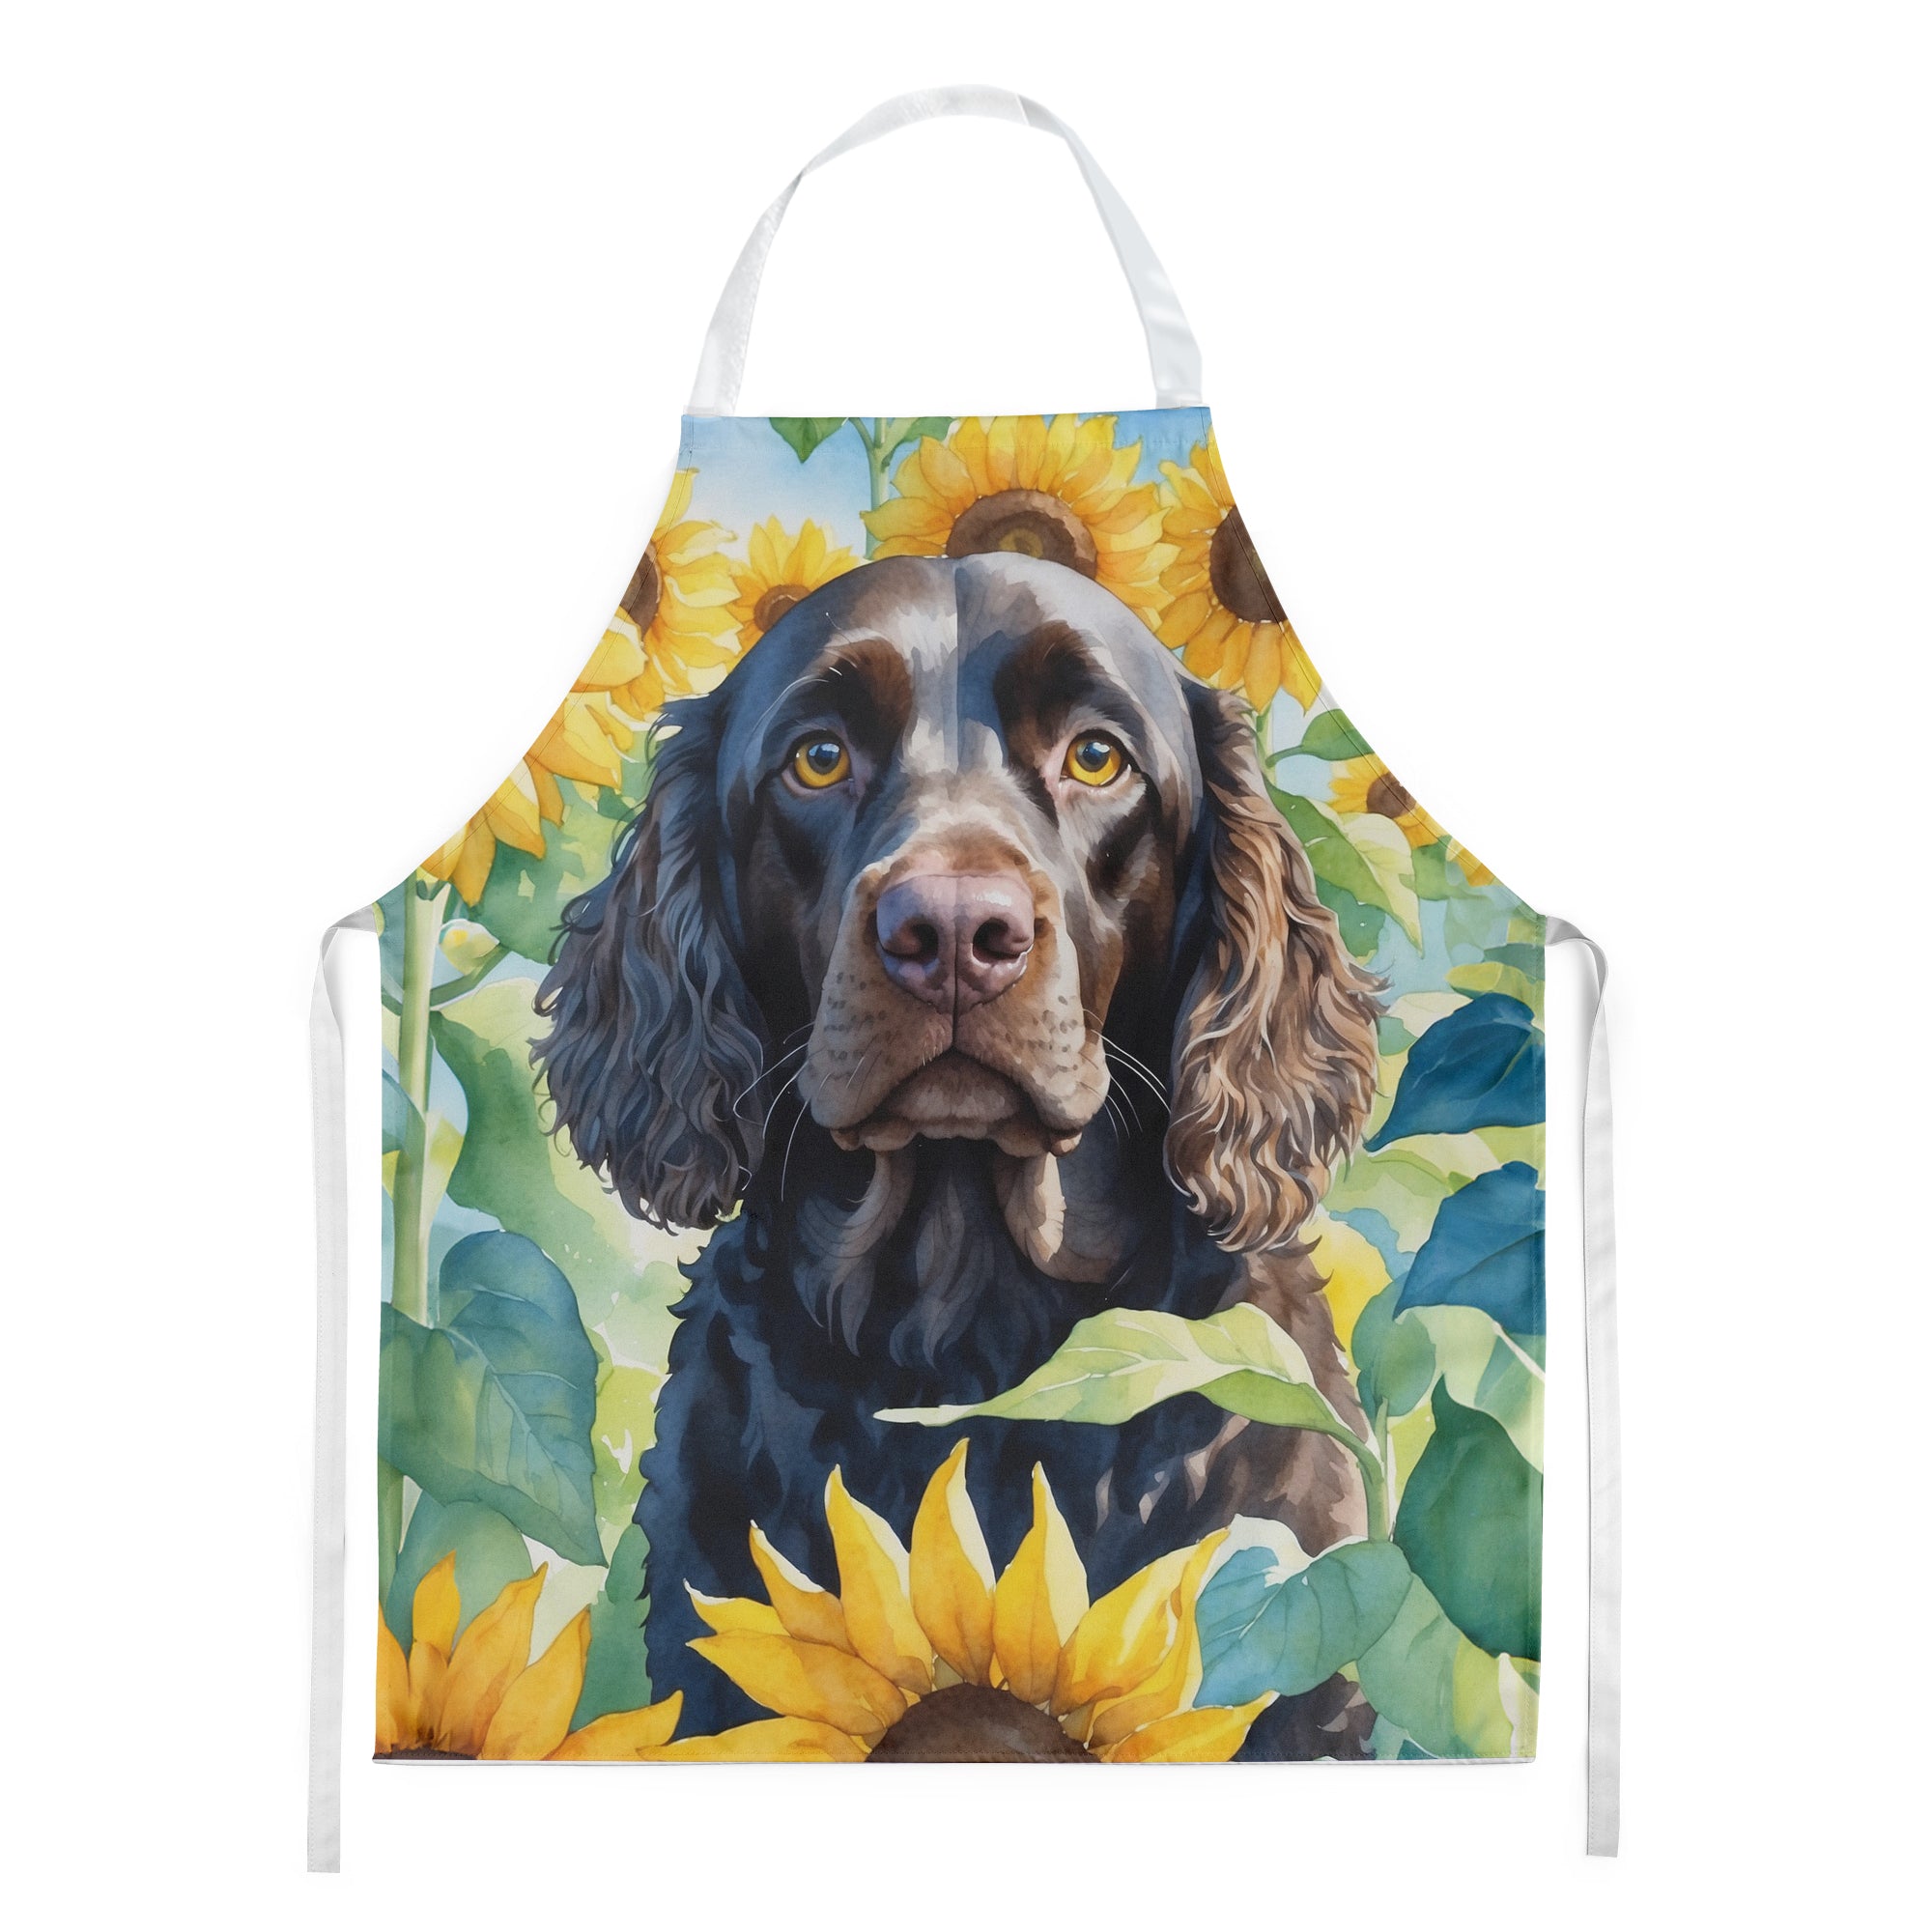 Buy this American Water Spaniel in Sunflowers Apron